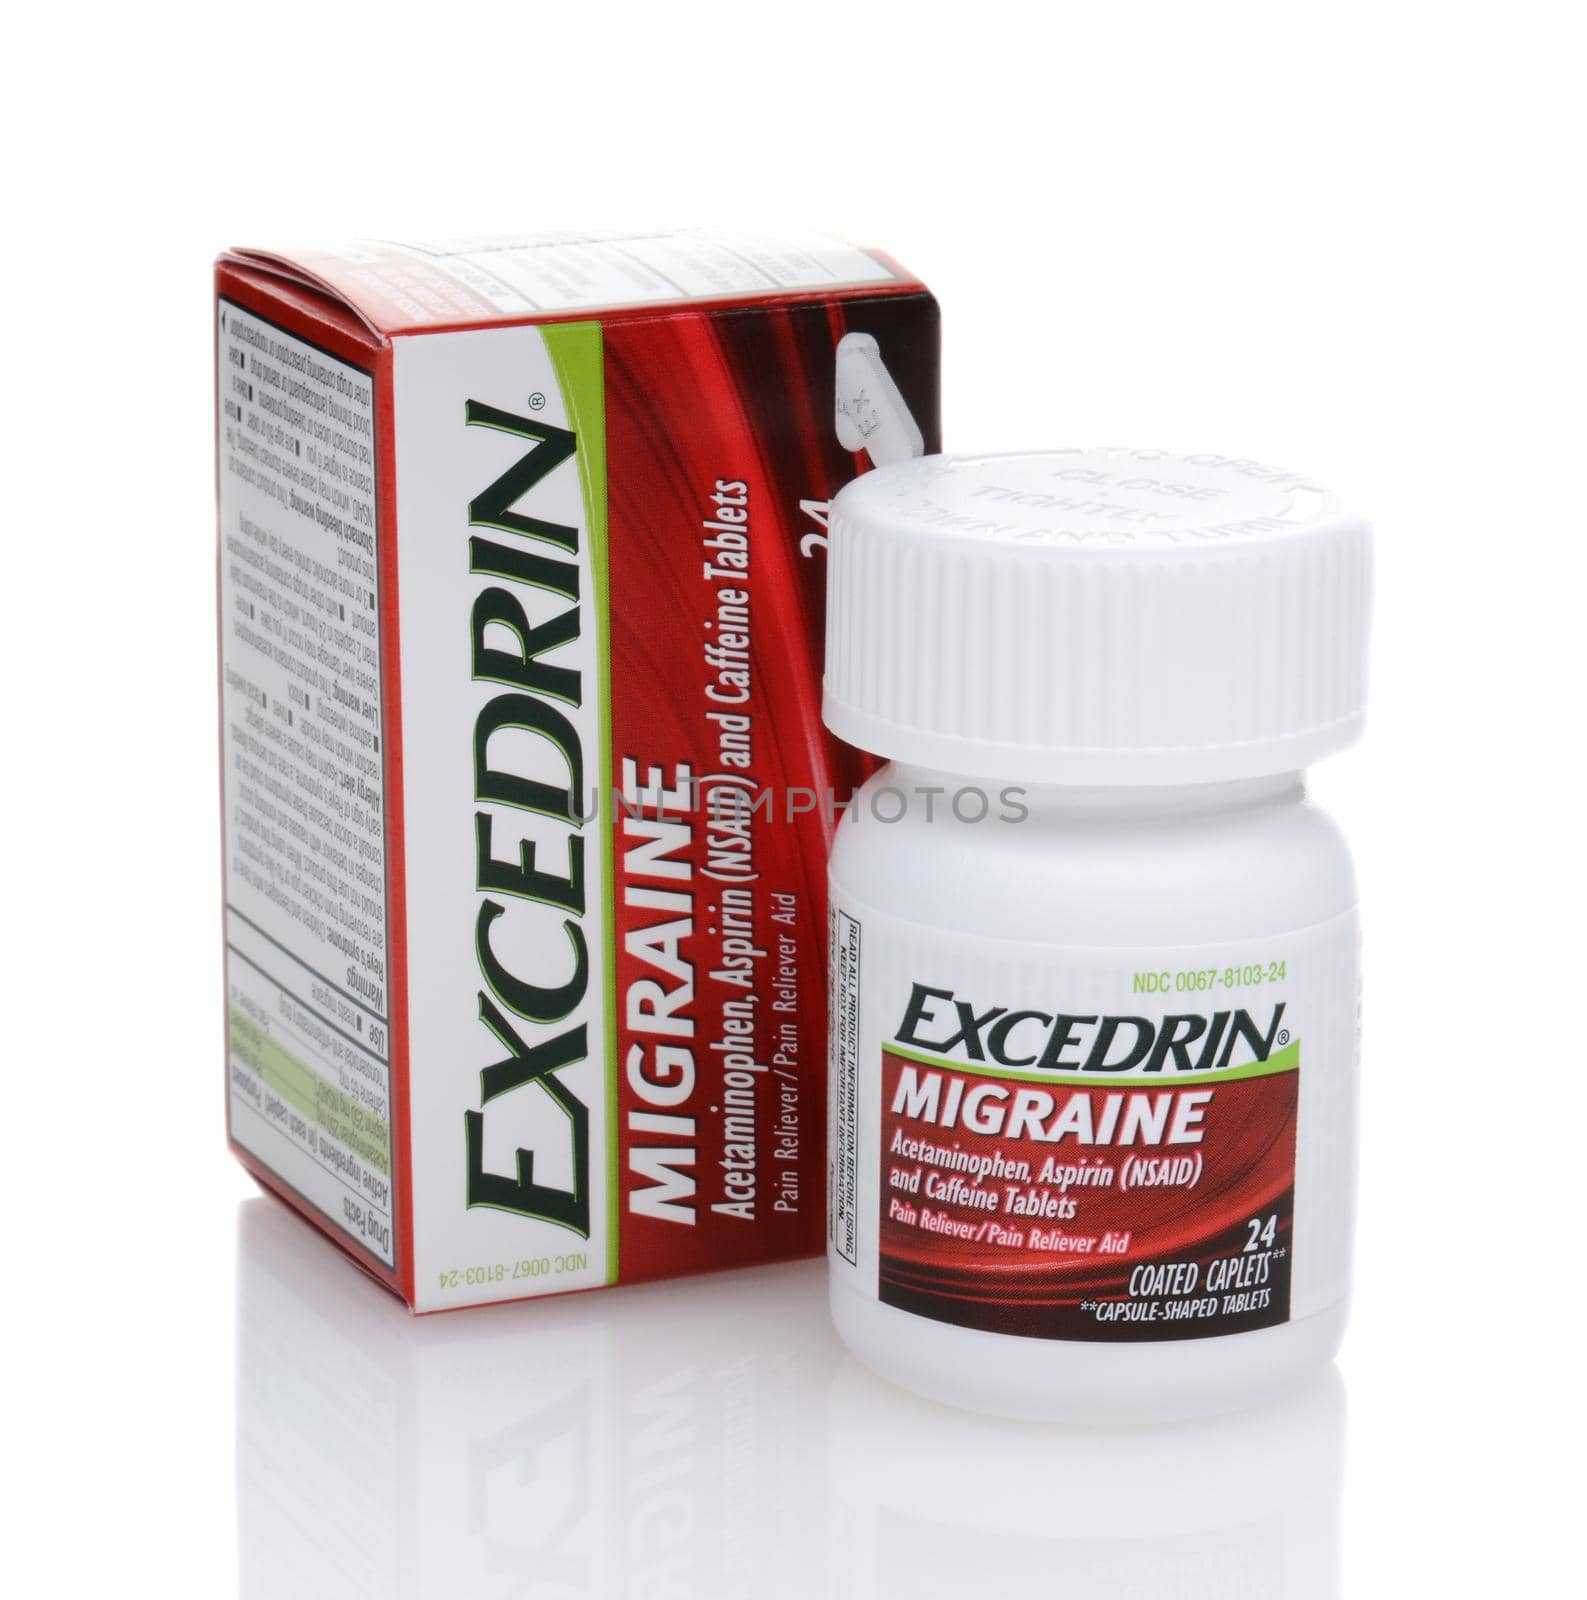 IRVINE, CA - JUNE 23, 2014: A Bottle of Excedrin MIgraine Pain Reliever.  Excedrin MIgraine was the first migraine headache medication available to consumers without a prescription.